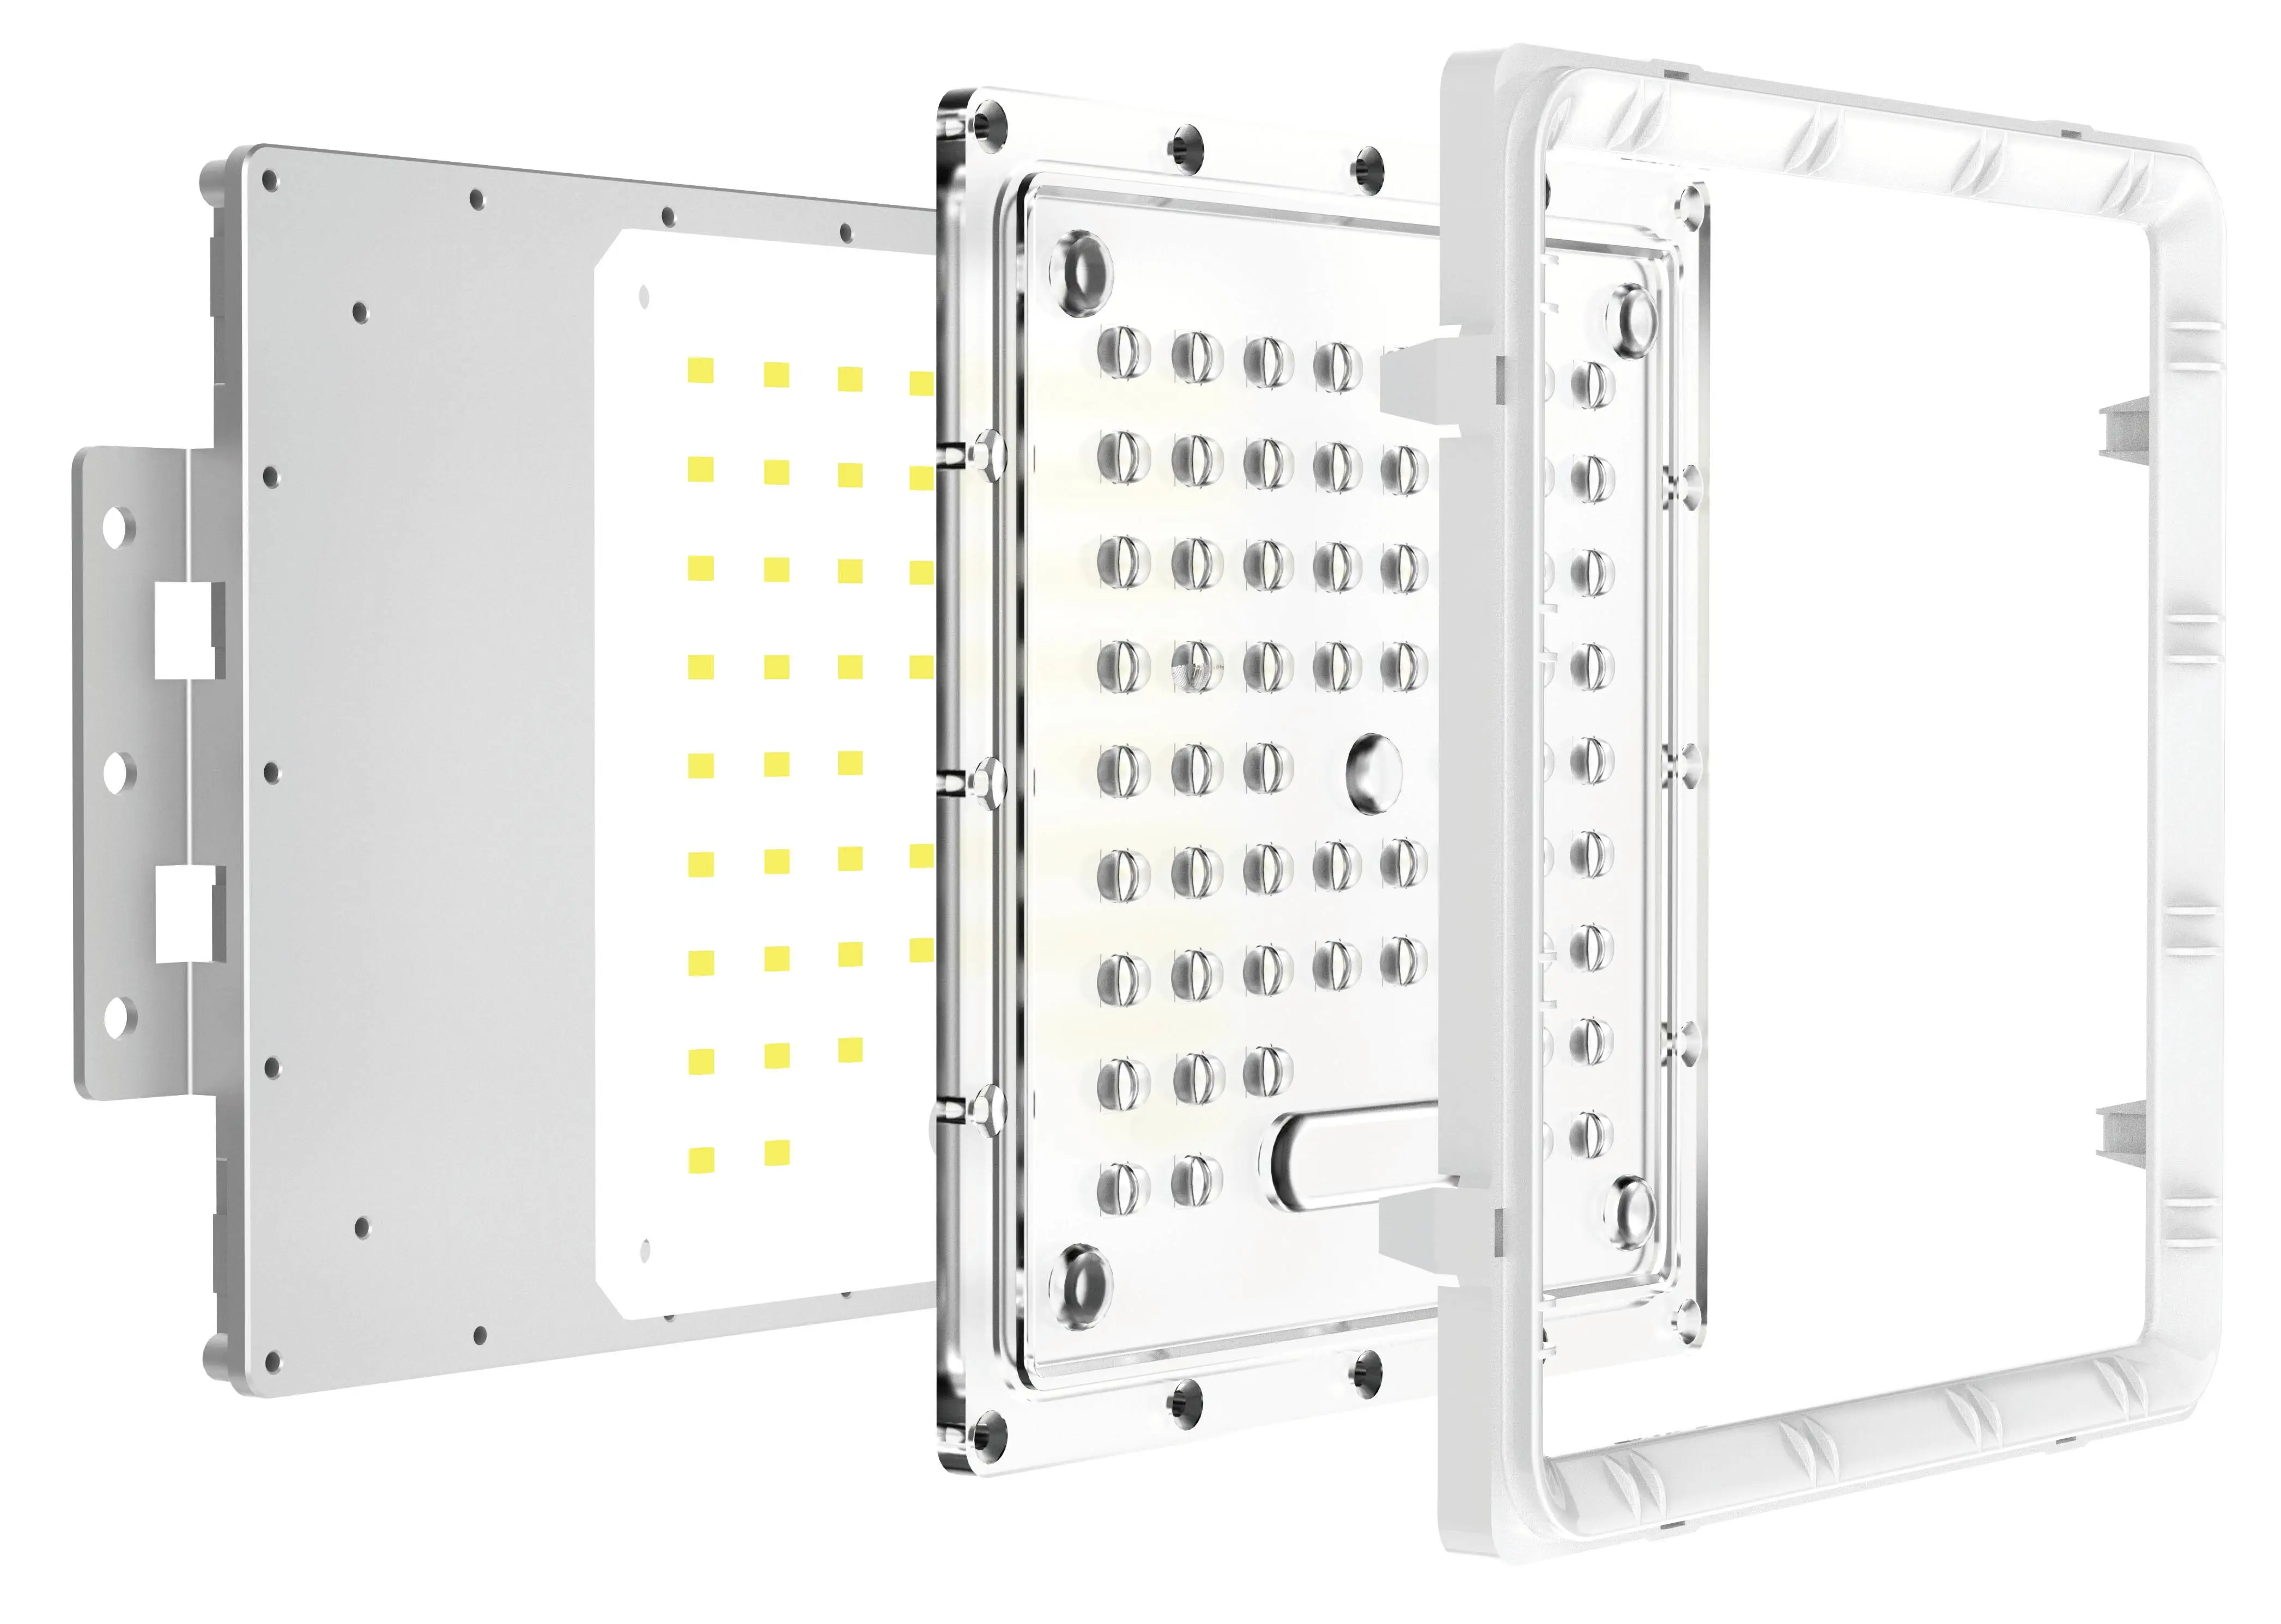 Related content of LED modules in solar street lights